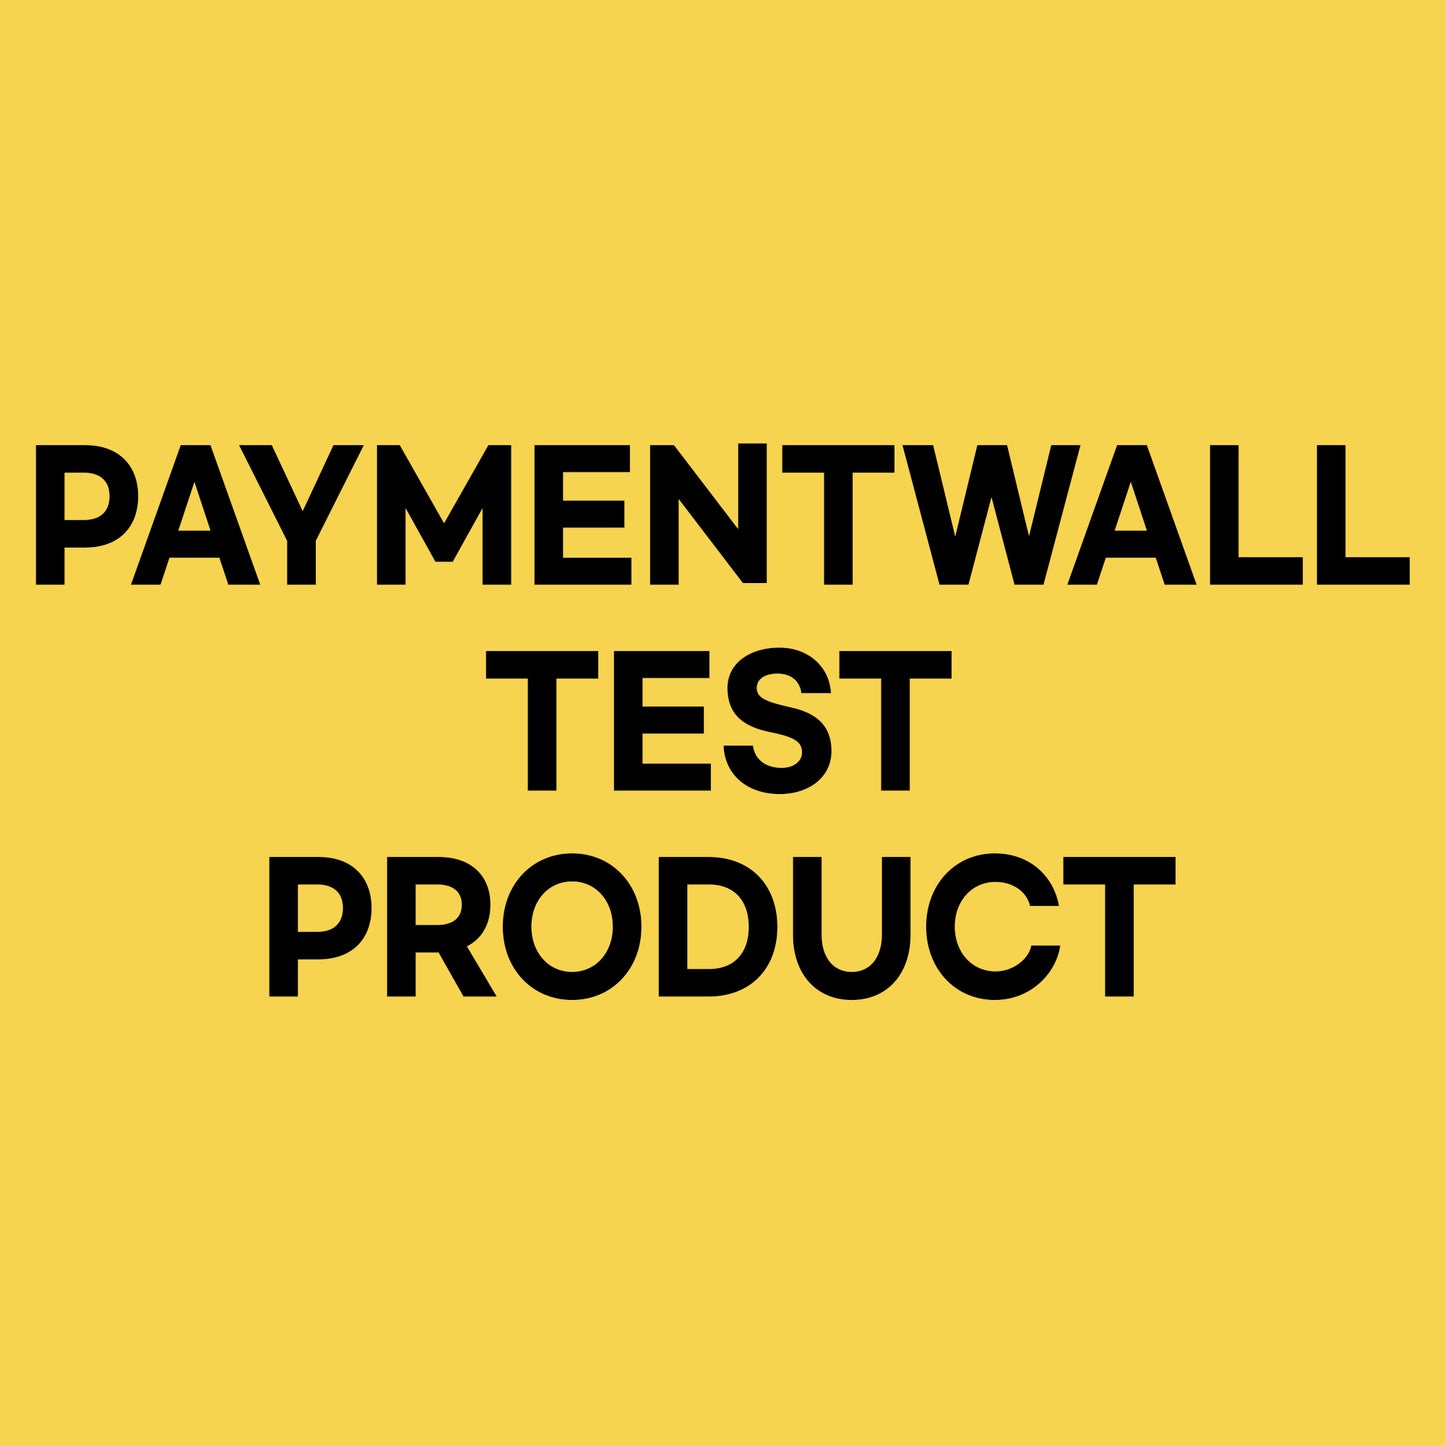 paymentwall test product